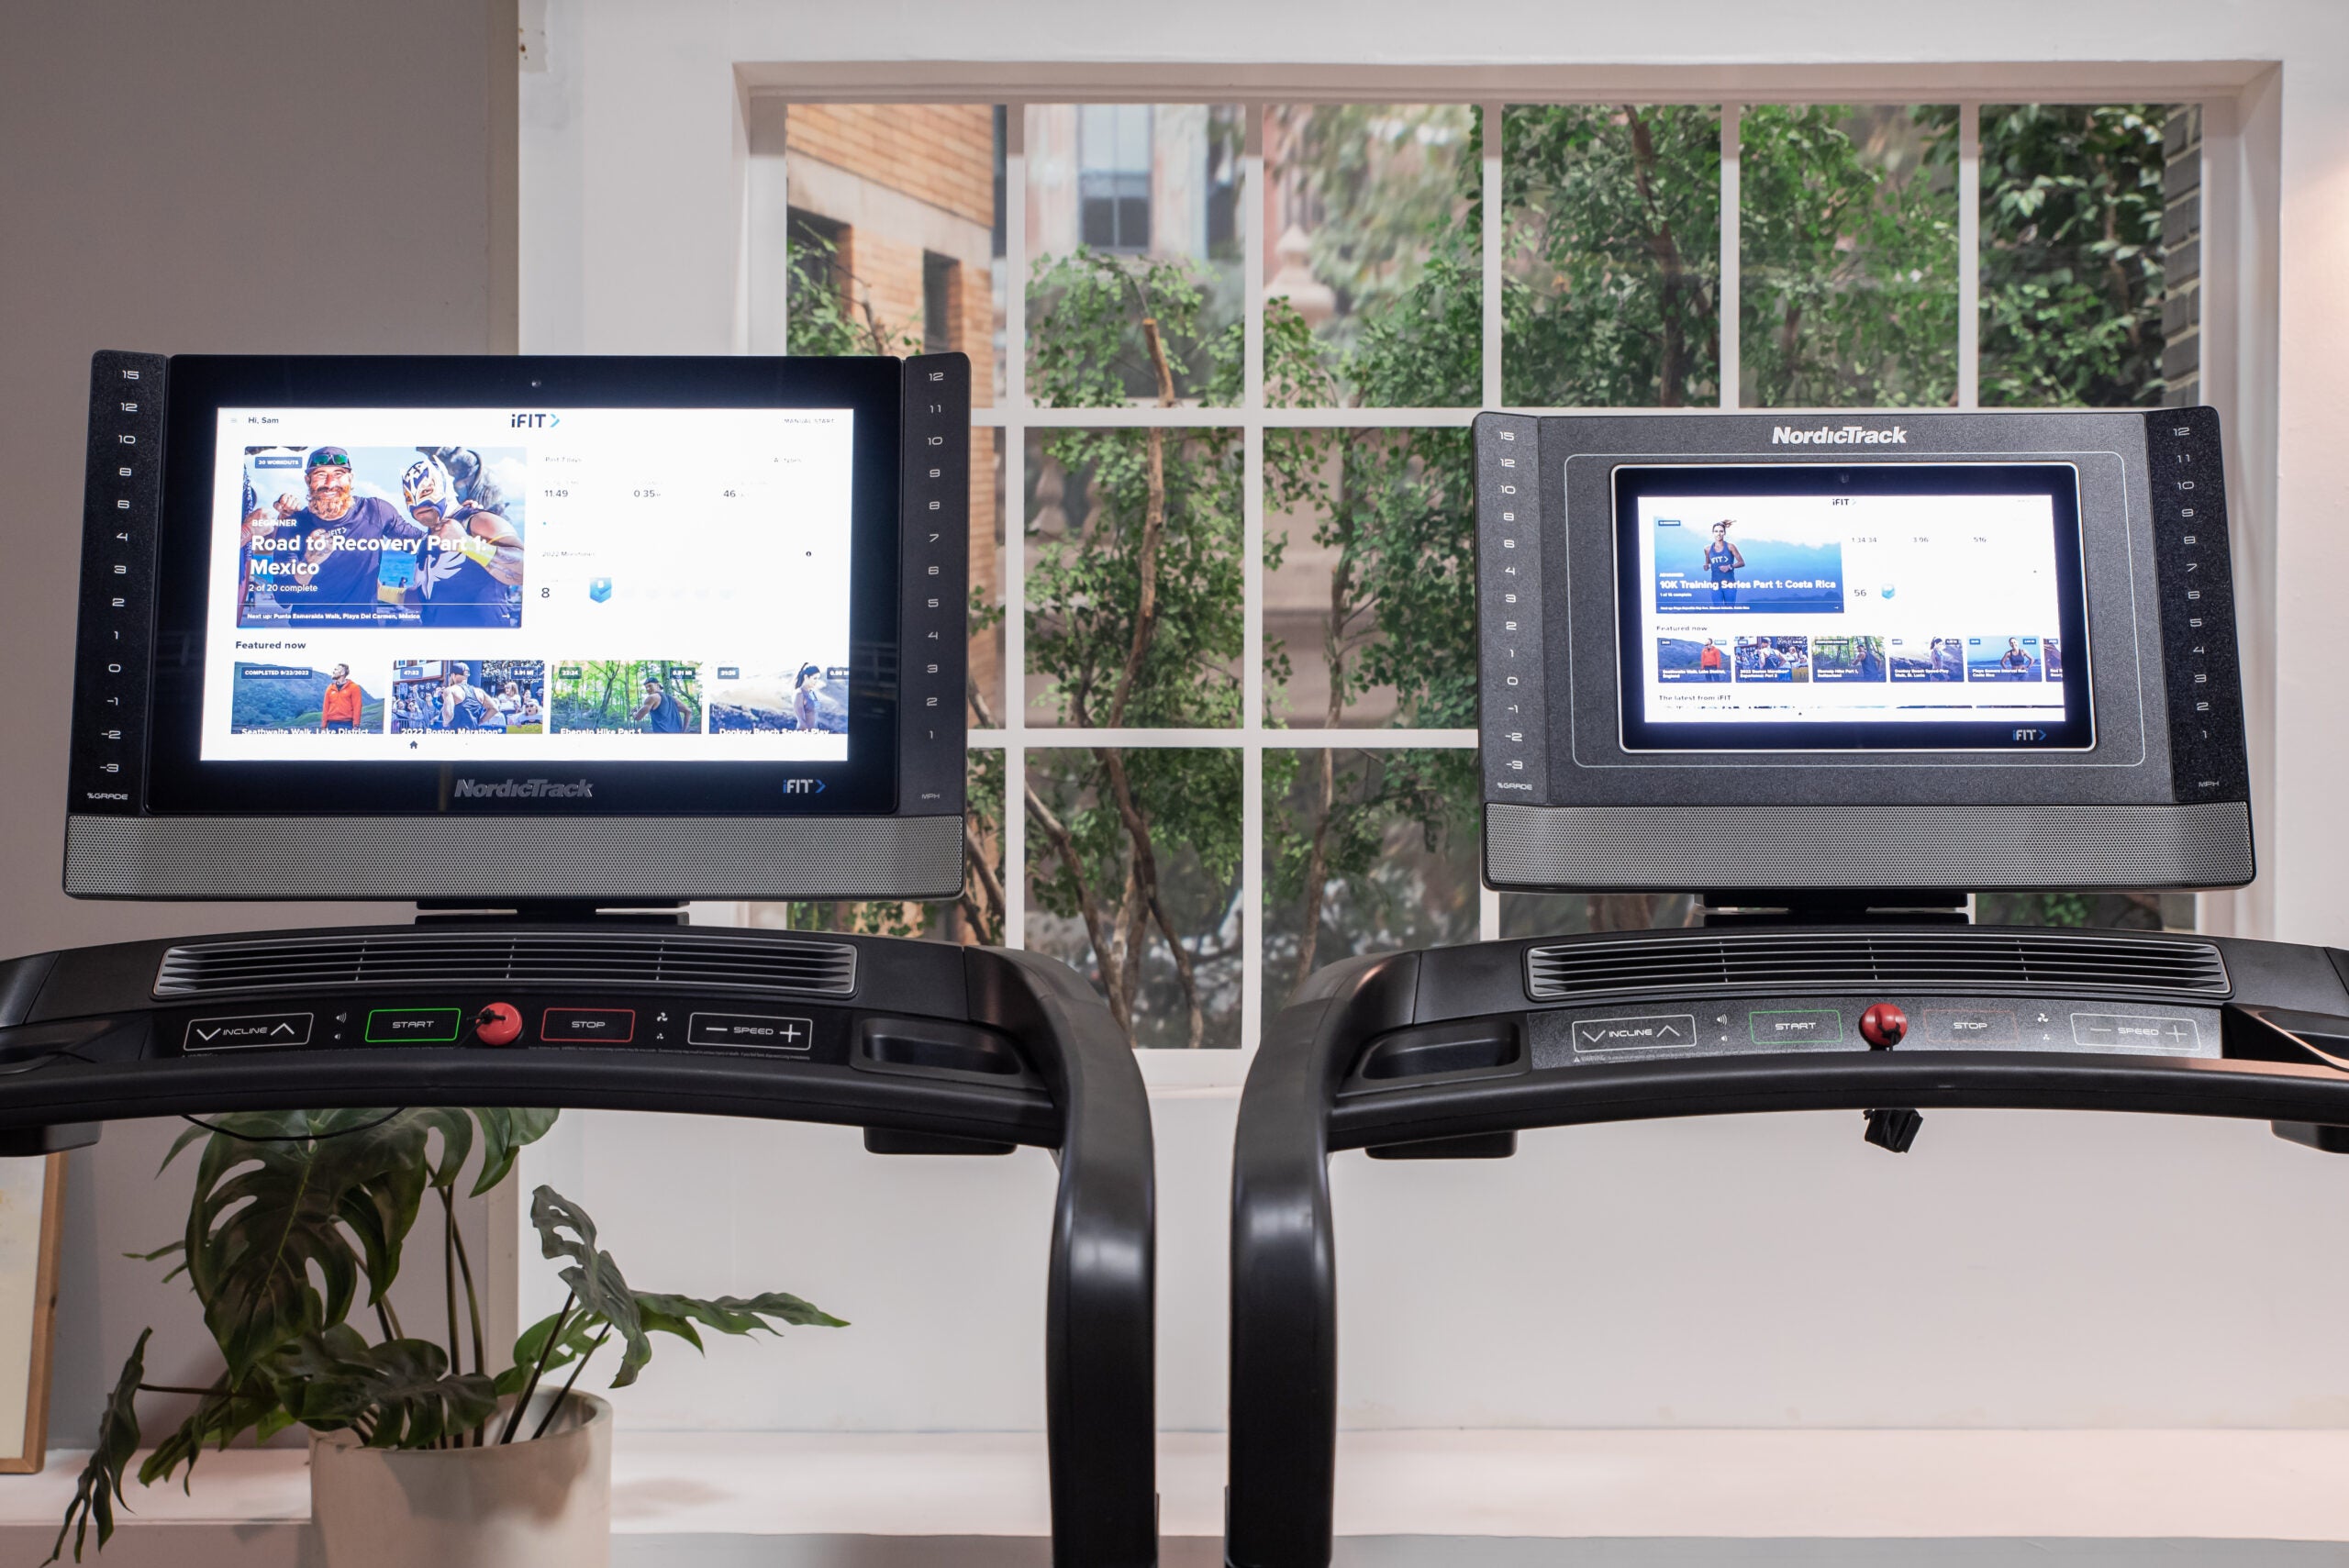 Home Treadmill Buying Guide